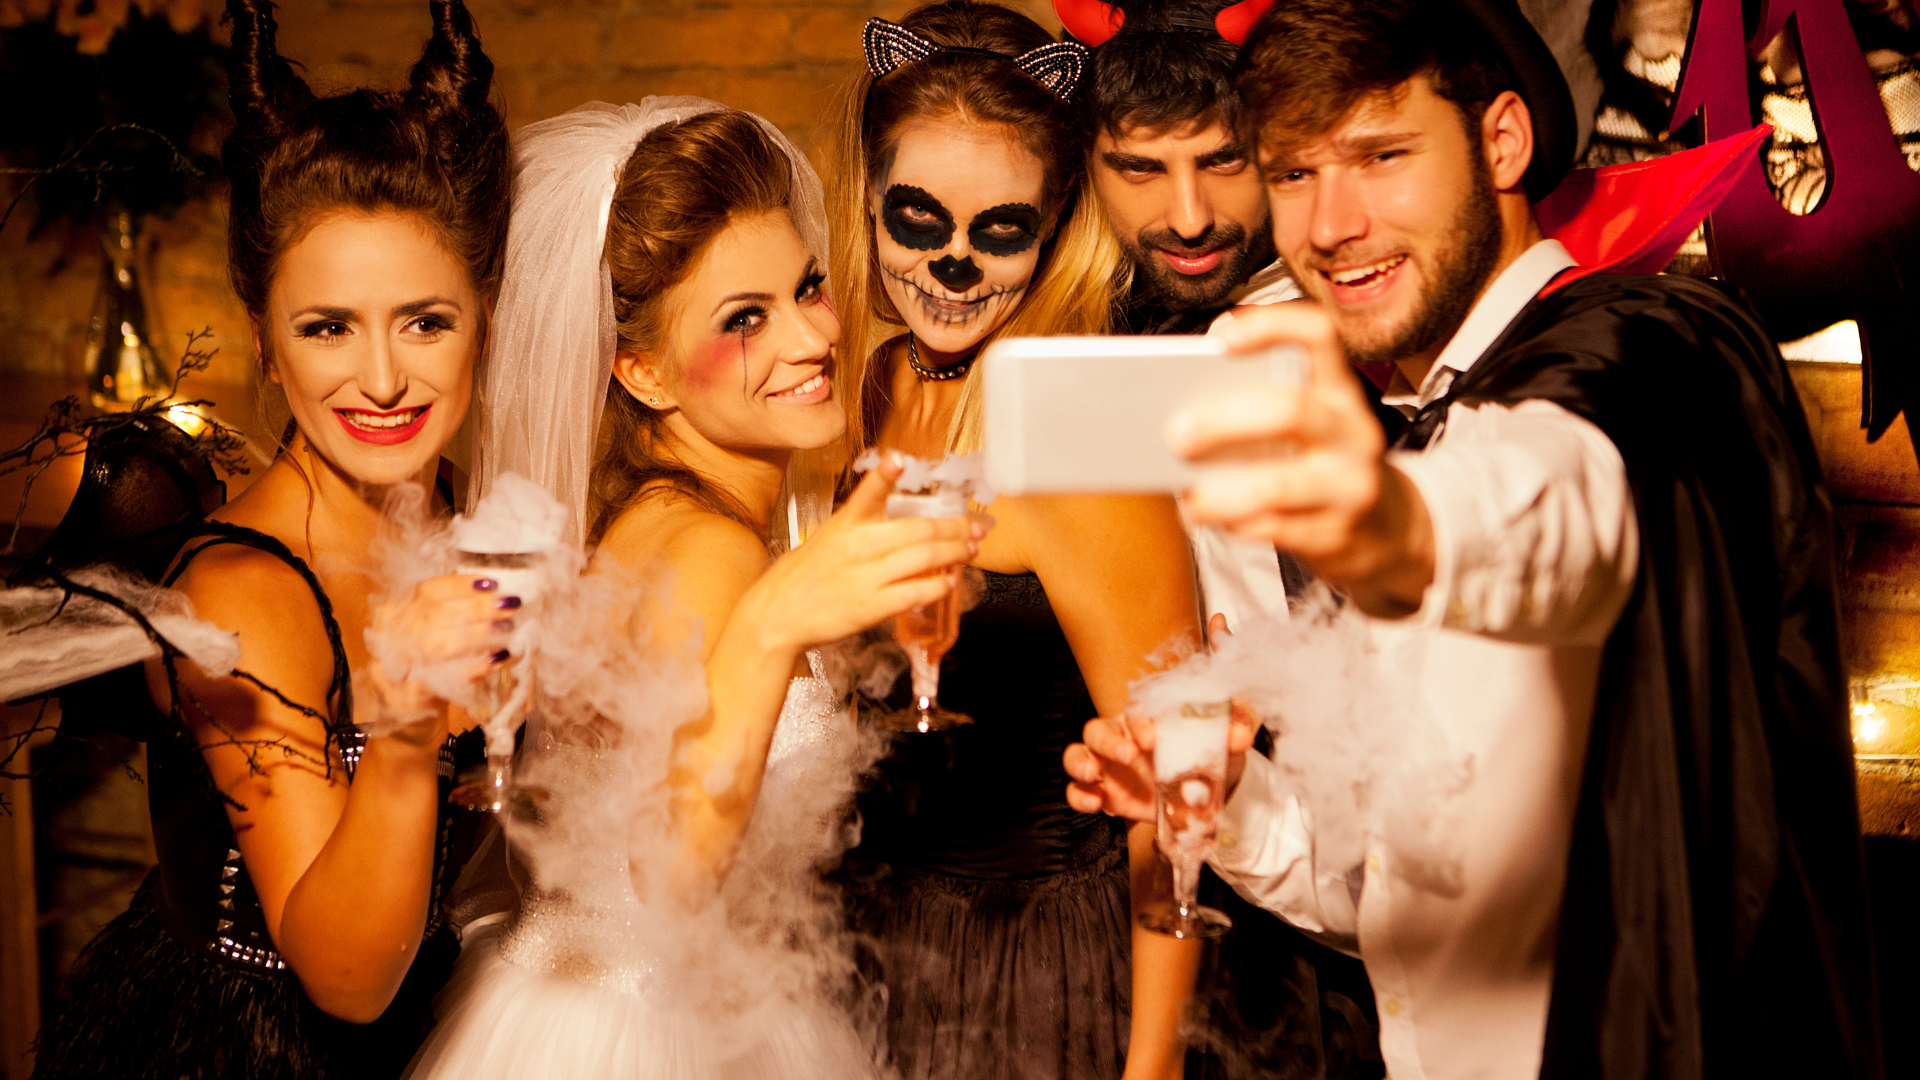 5 Halloween Party Tips That Will Have Your Friends Coming Back Year After Year